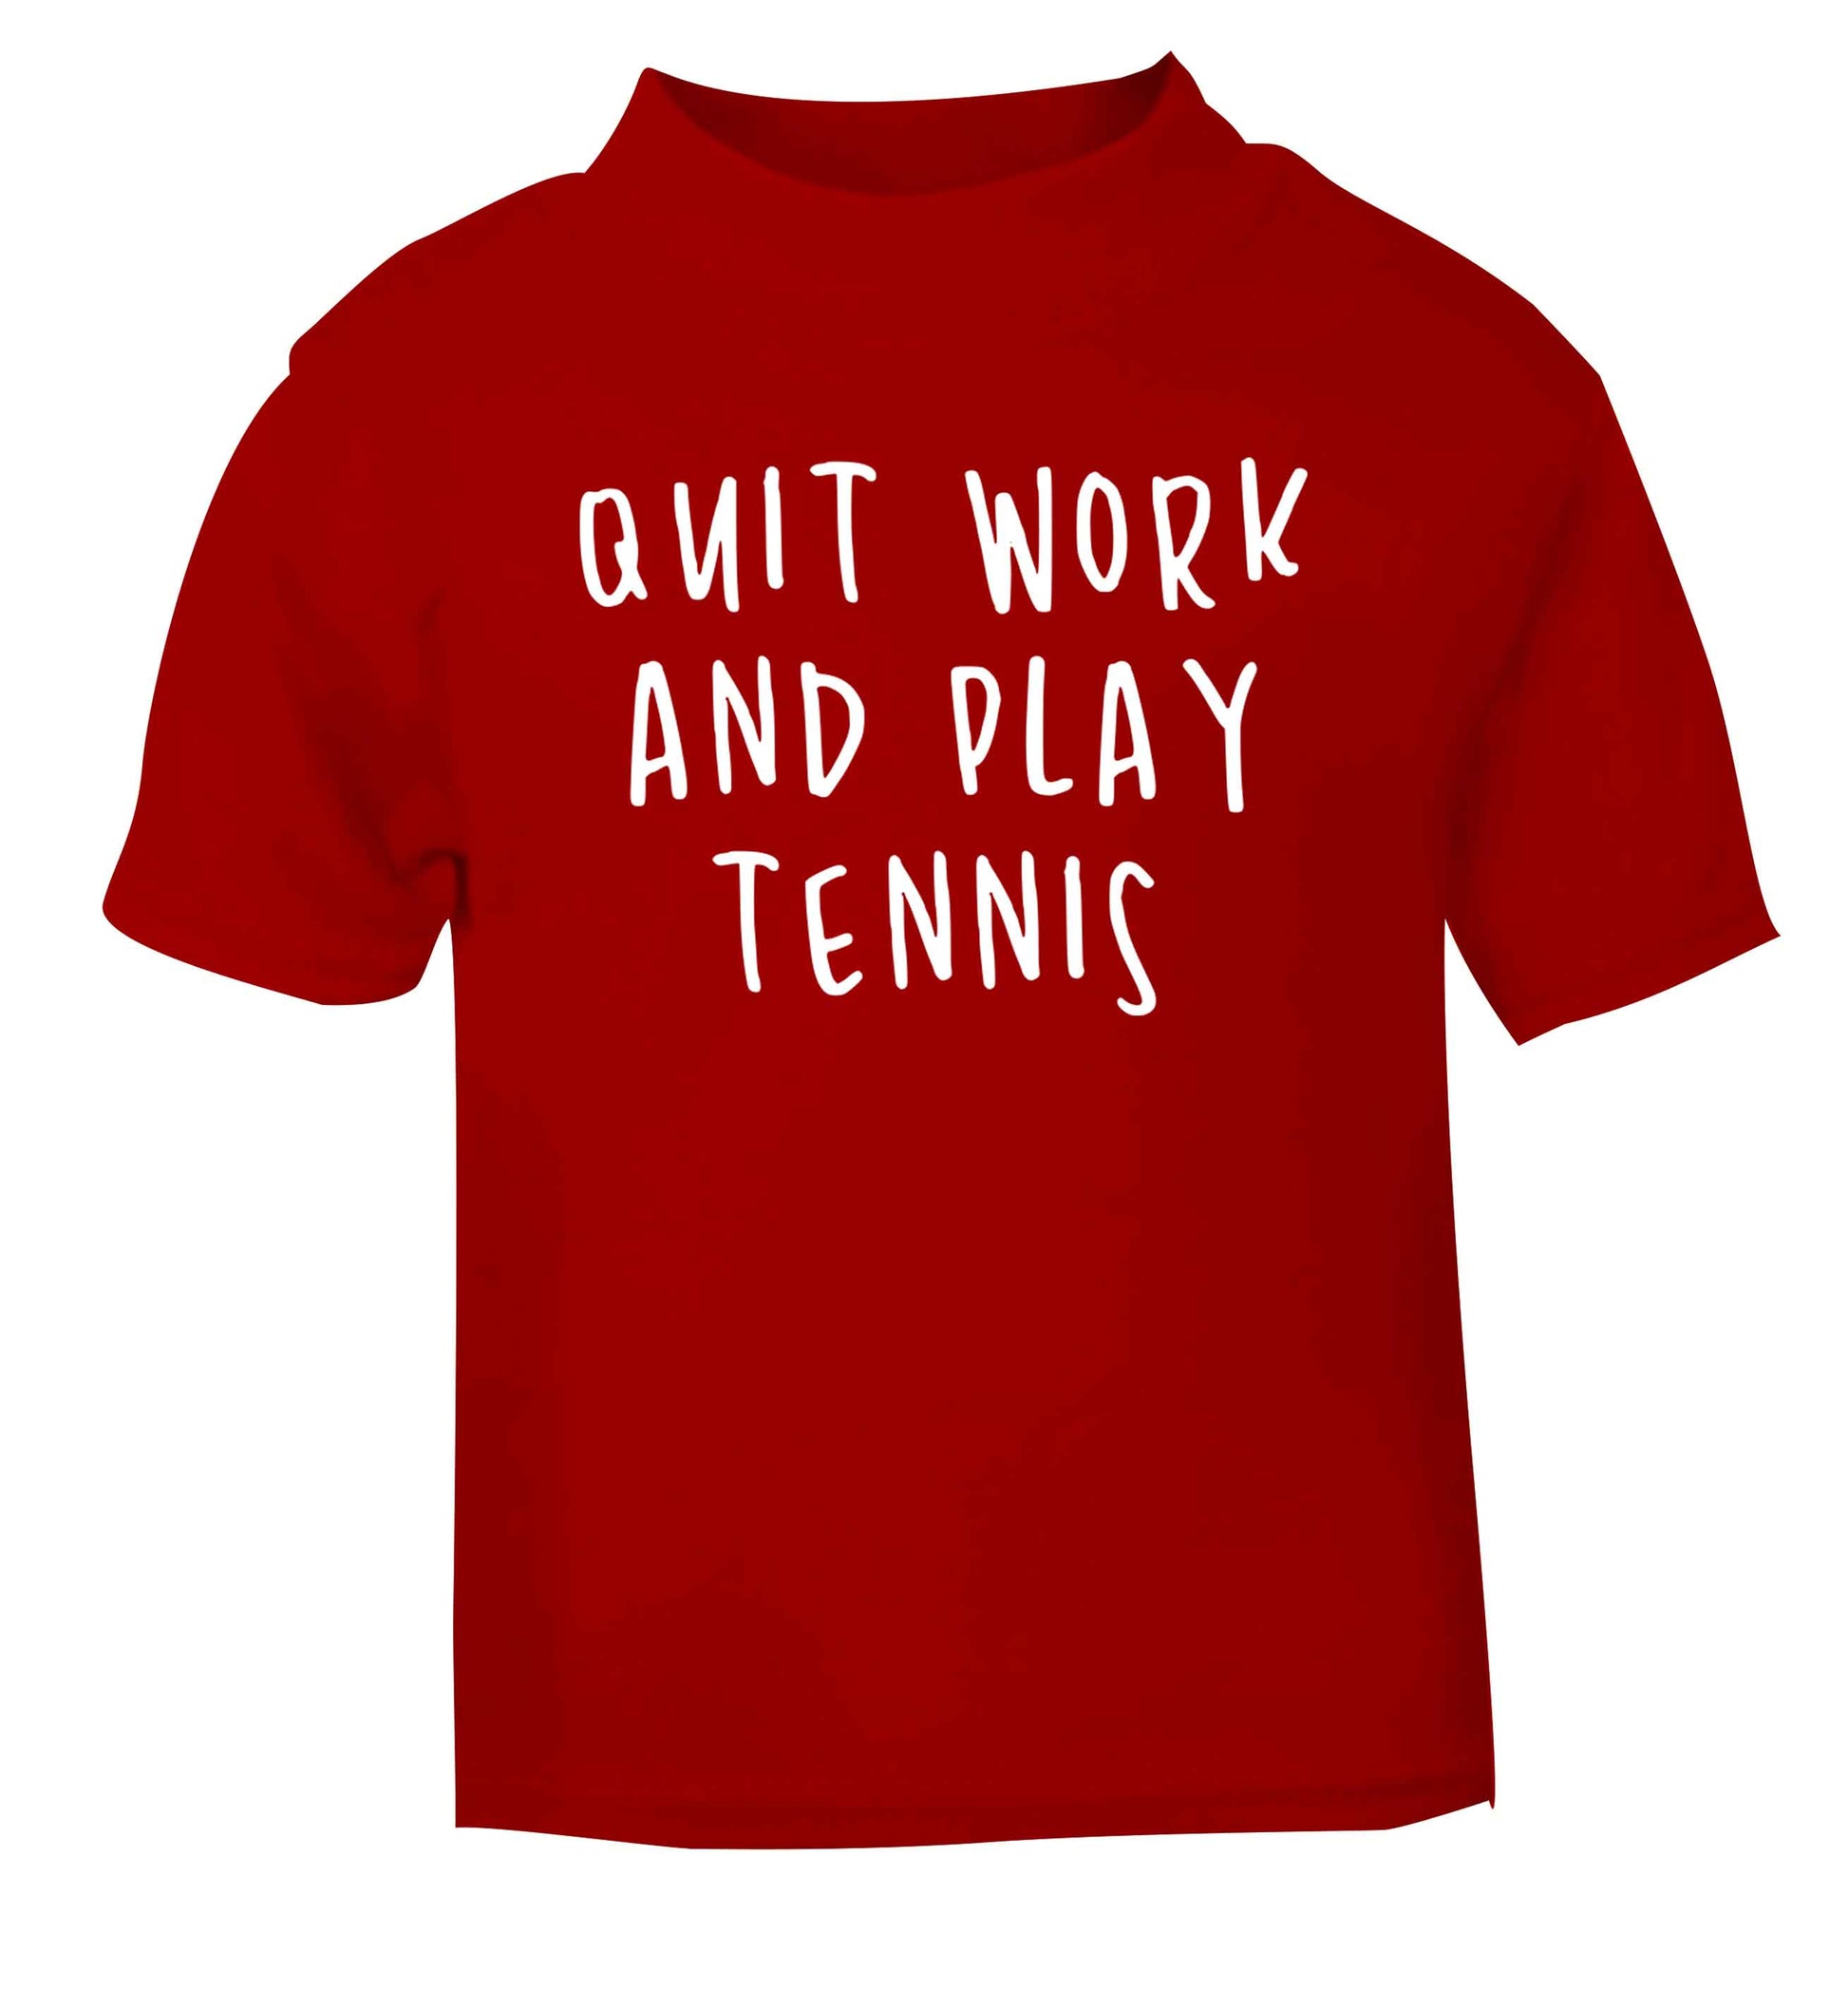 Quit work and play tennis red Baby Toddler Tshirt 2 Years